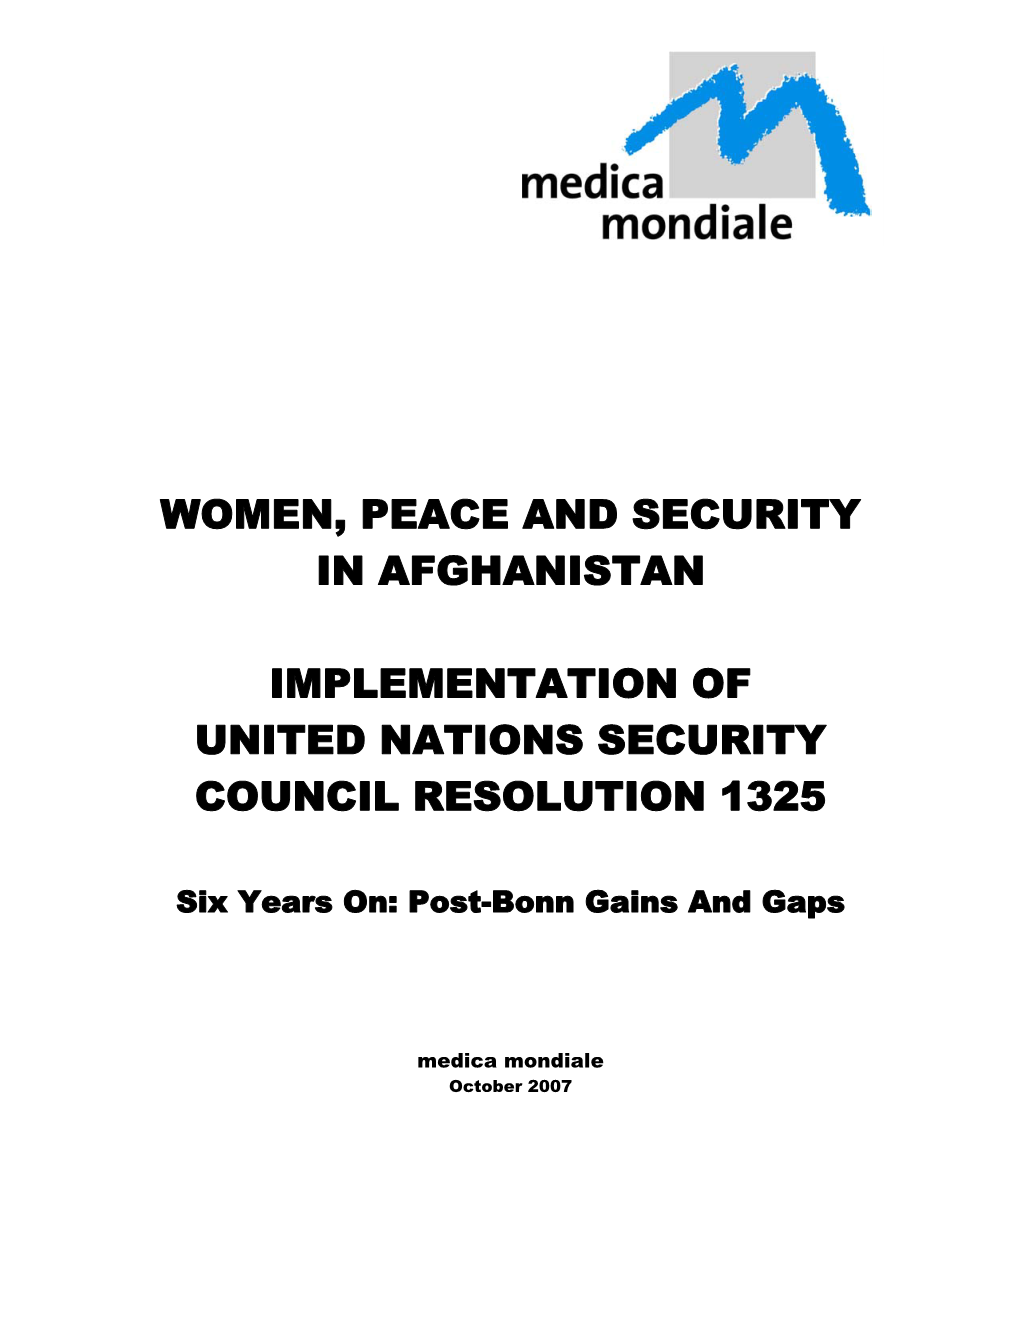 Women, Peace and Security in Afghanistan Implementation